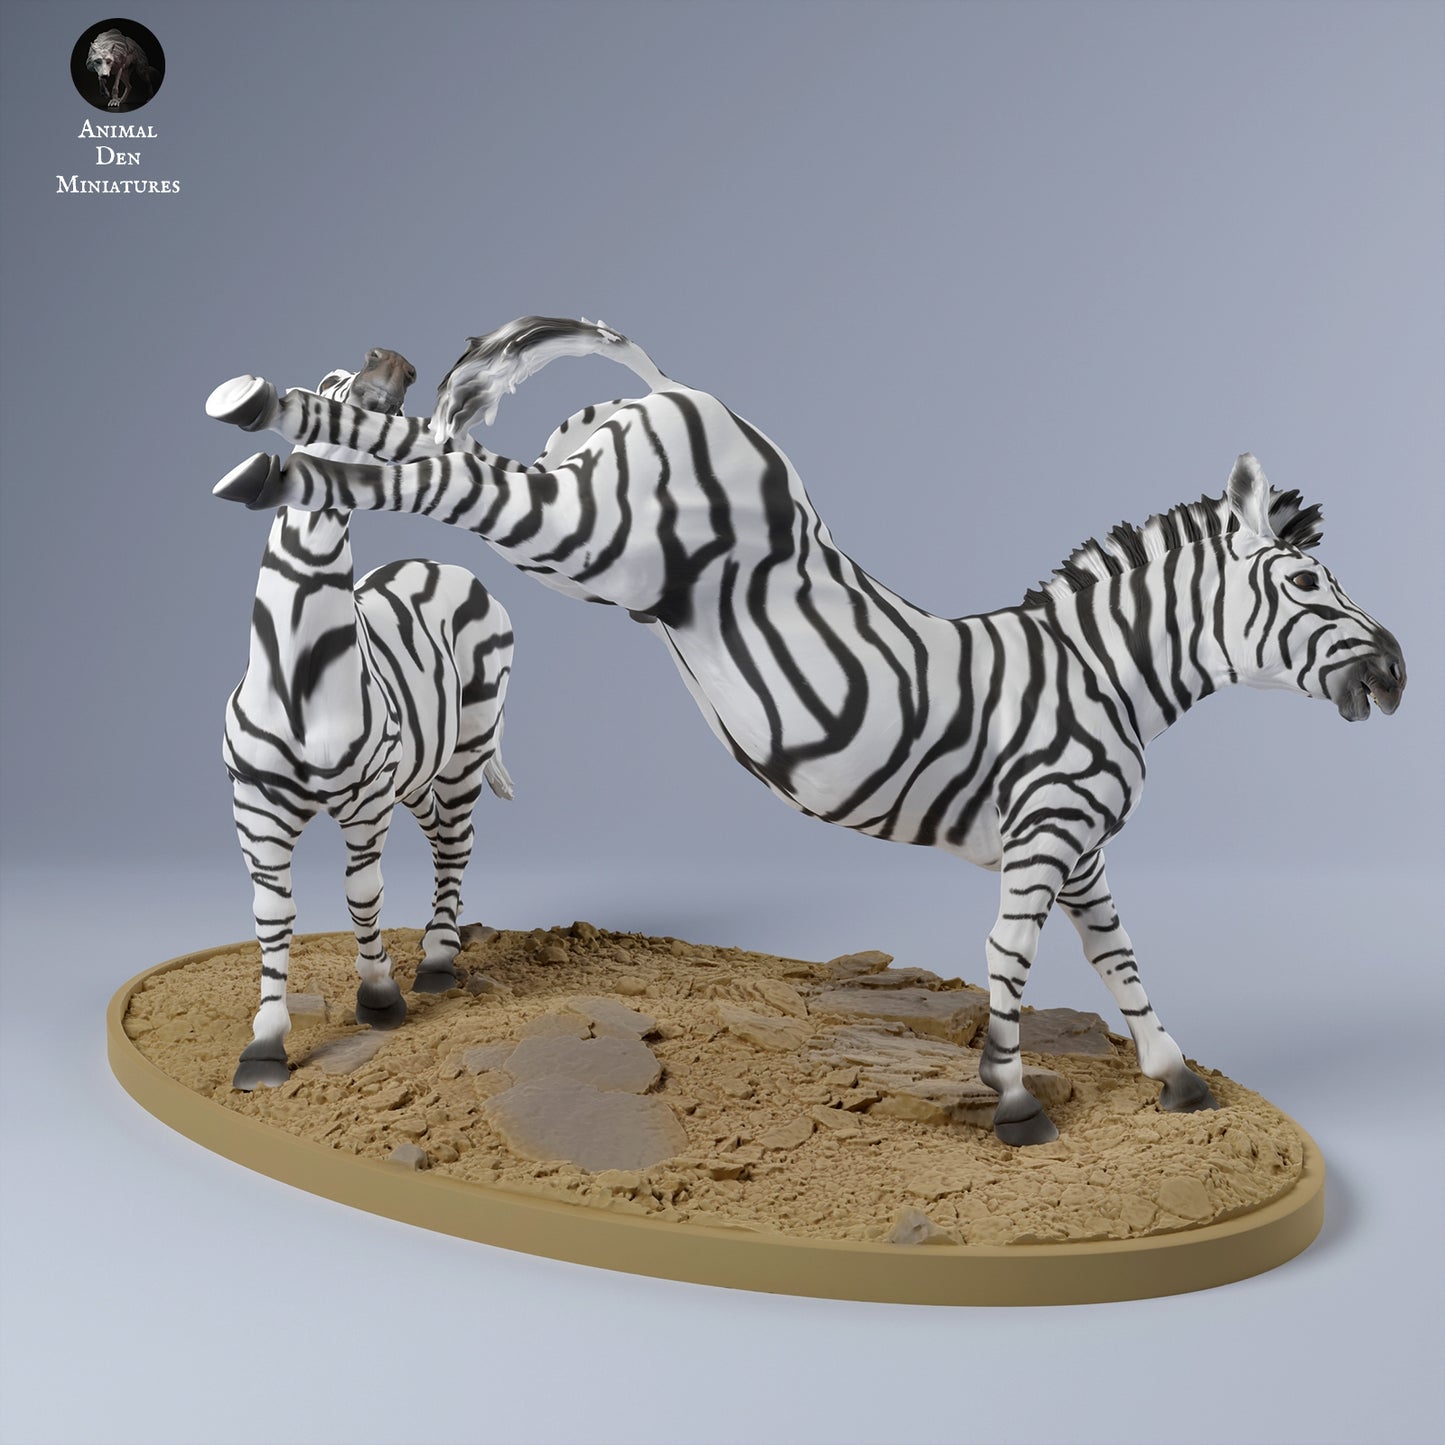 Zebra's fighting - White resin ready to prep and paint